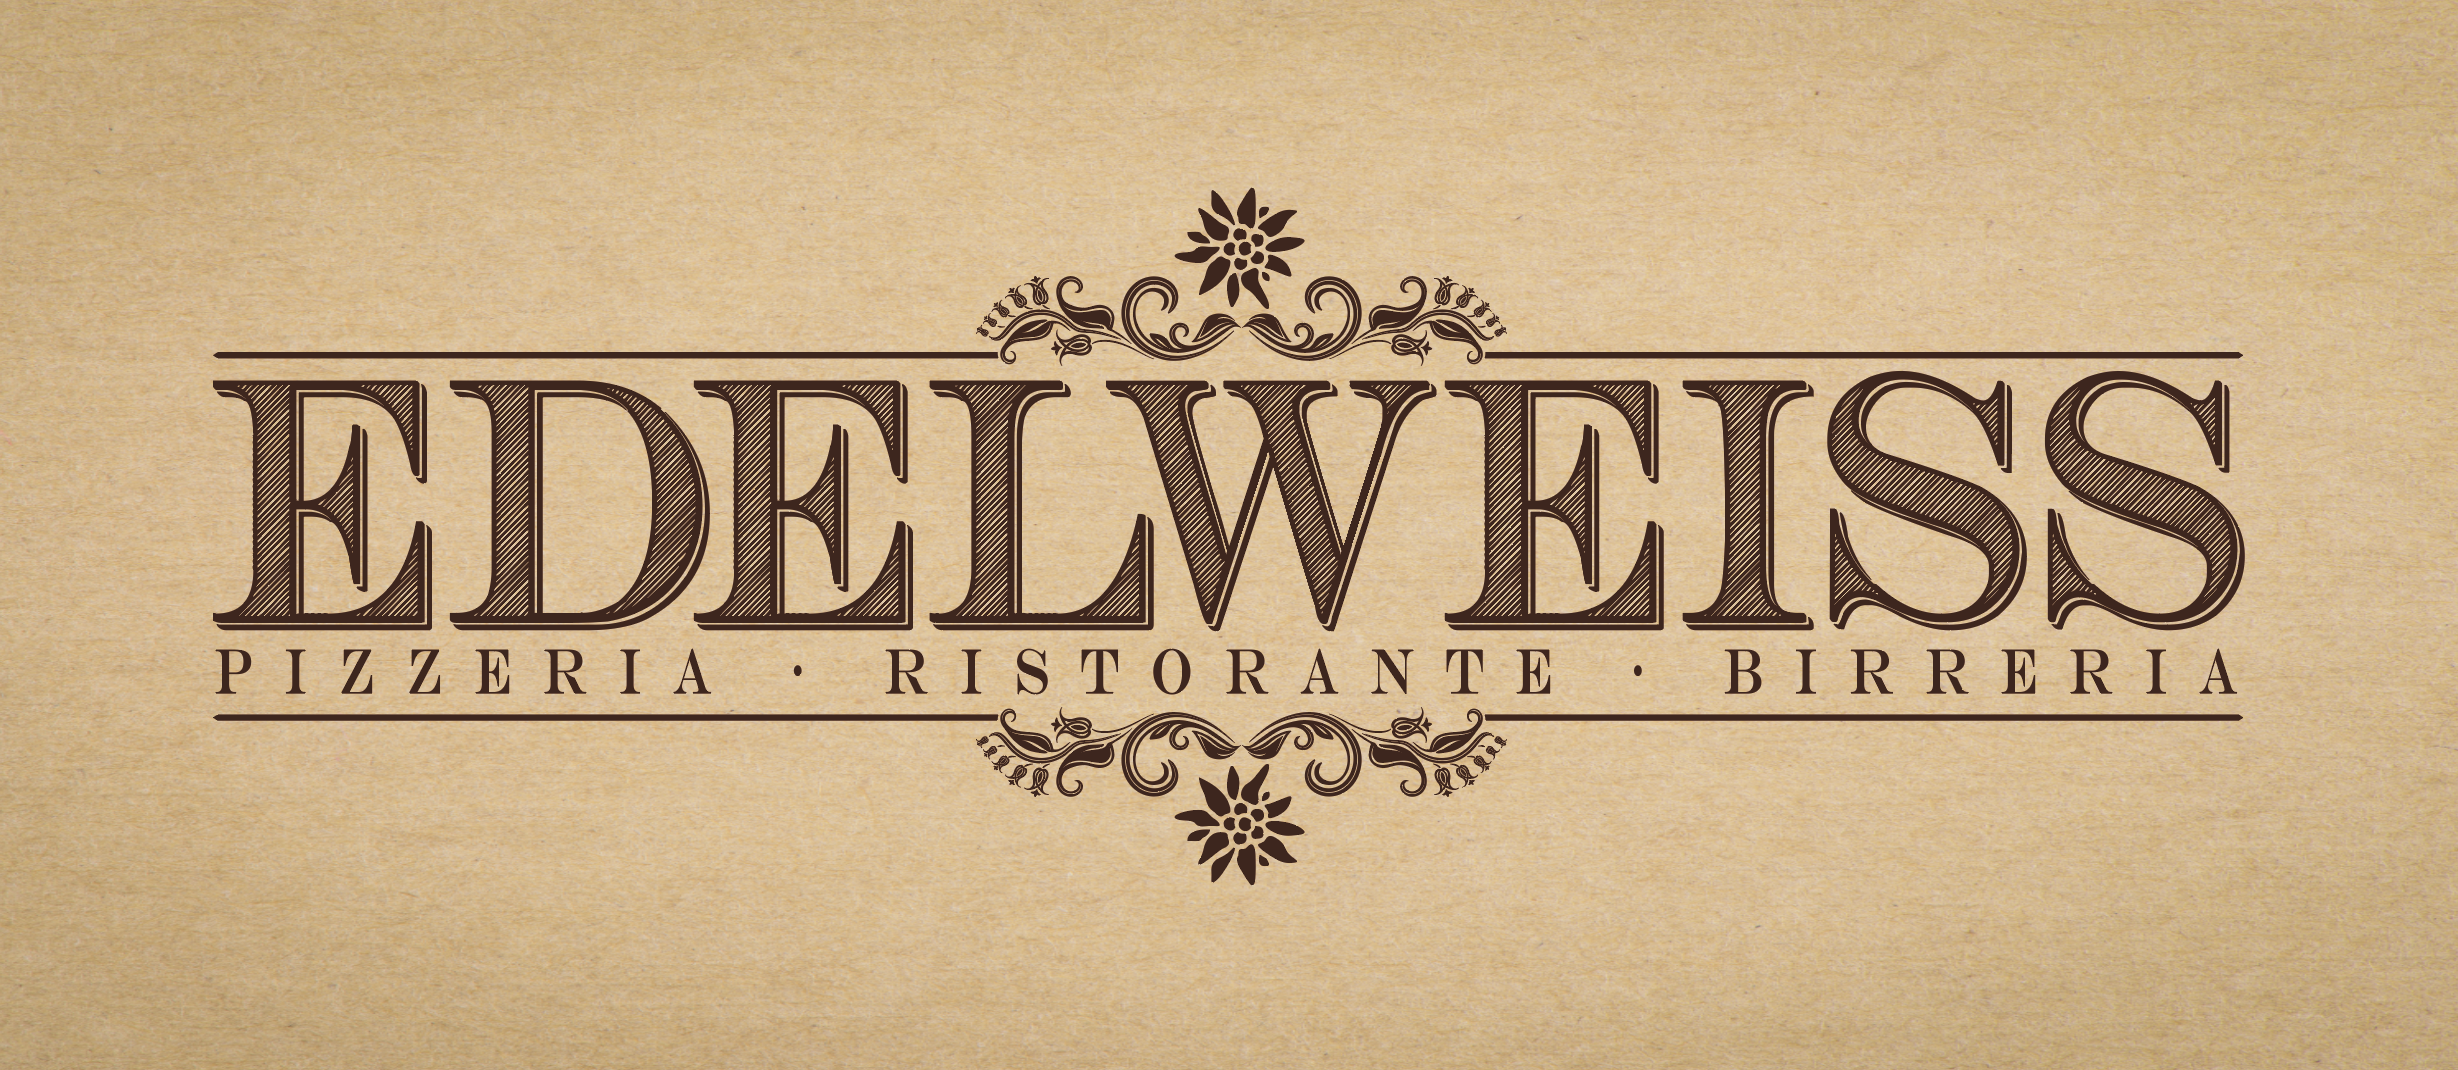 Marche & Wine all'Edelweiss